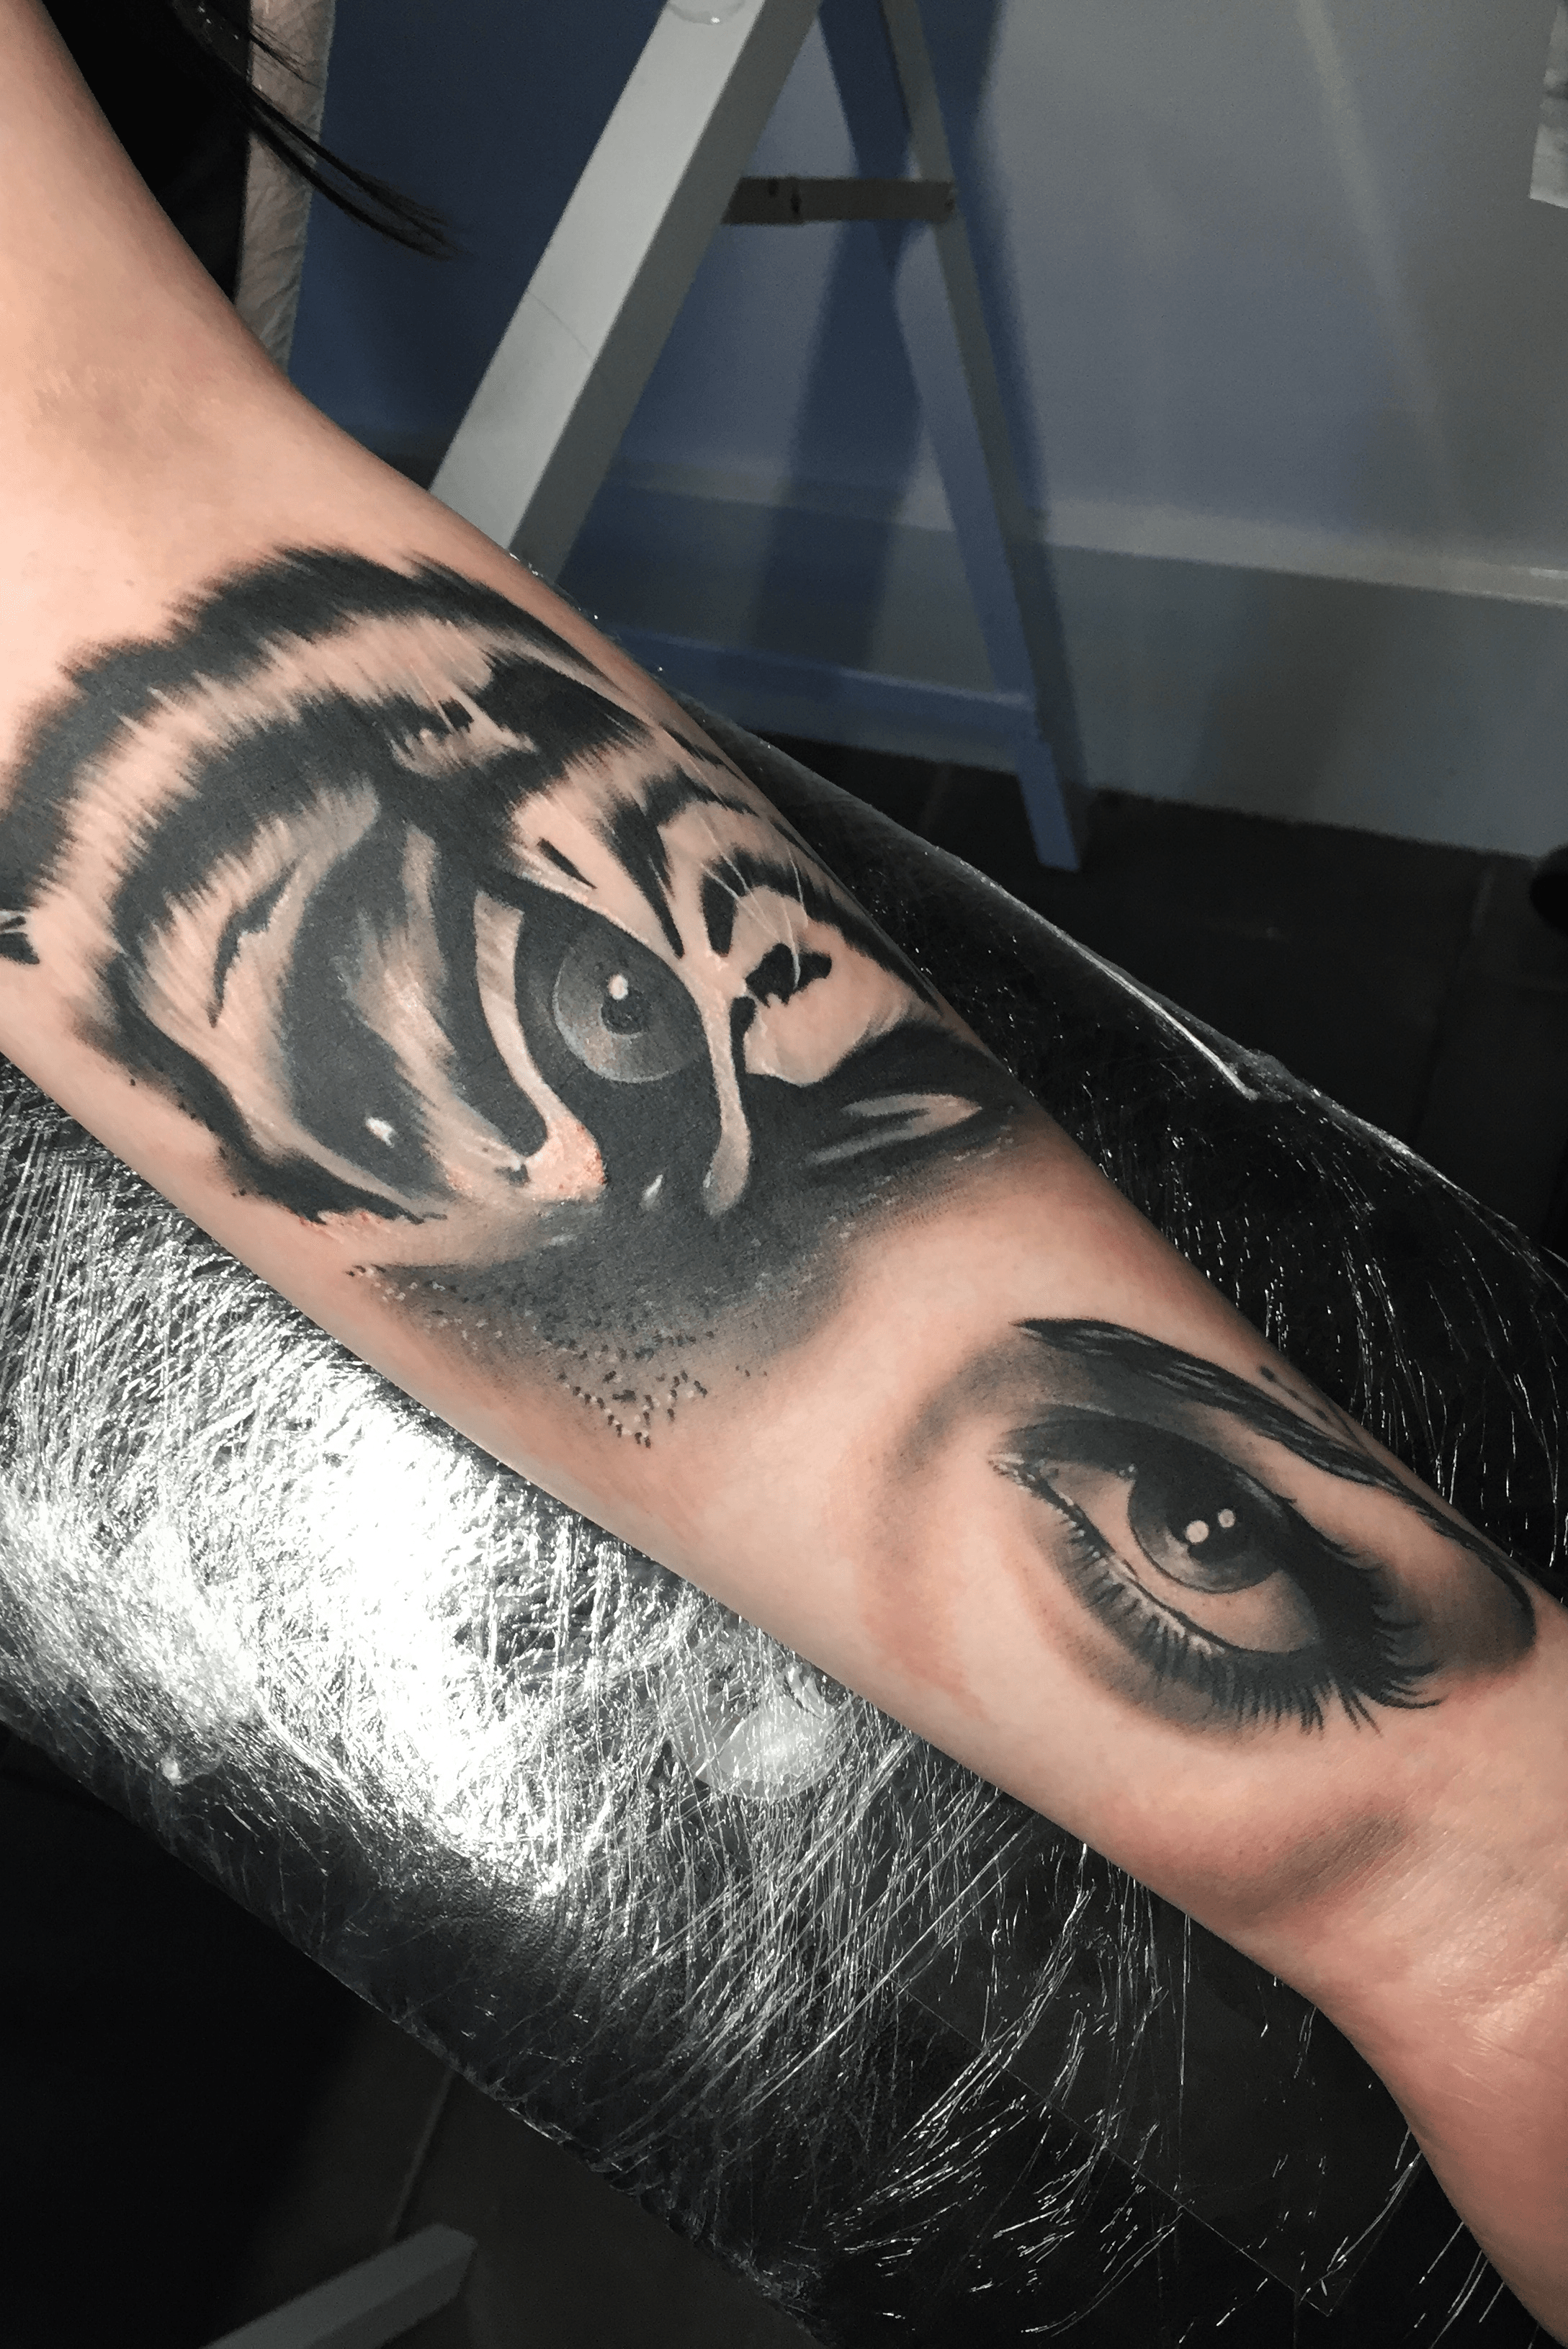 Tattoo uploaded by Steve Morgan Daley  Half Tiger half woman face black  and grey Done at the 3rd Annual Pittsburgh tattoo Expo  Tattoodo